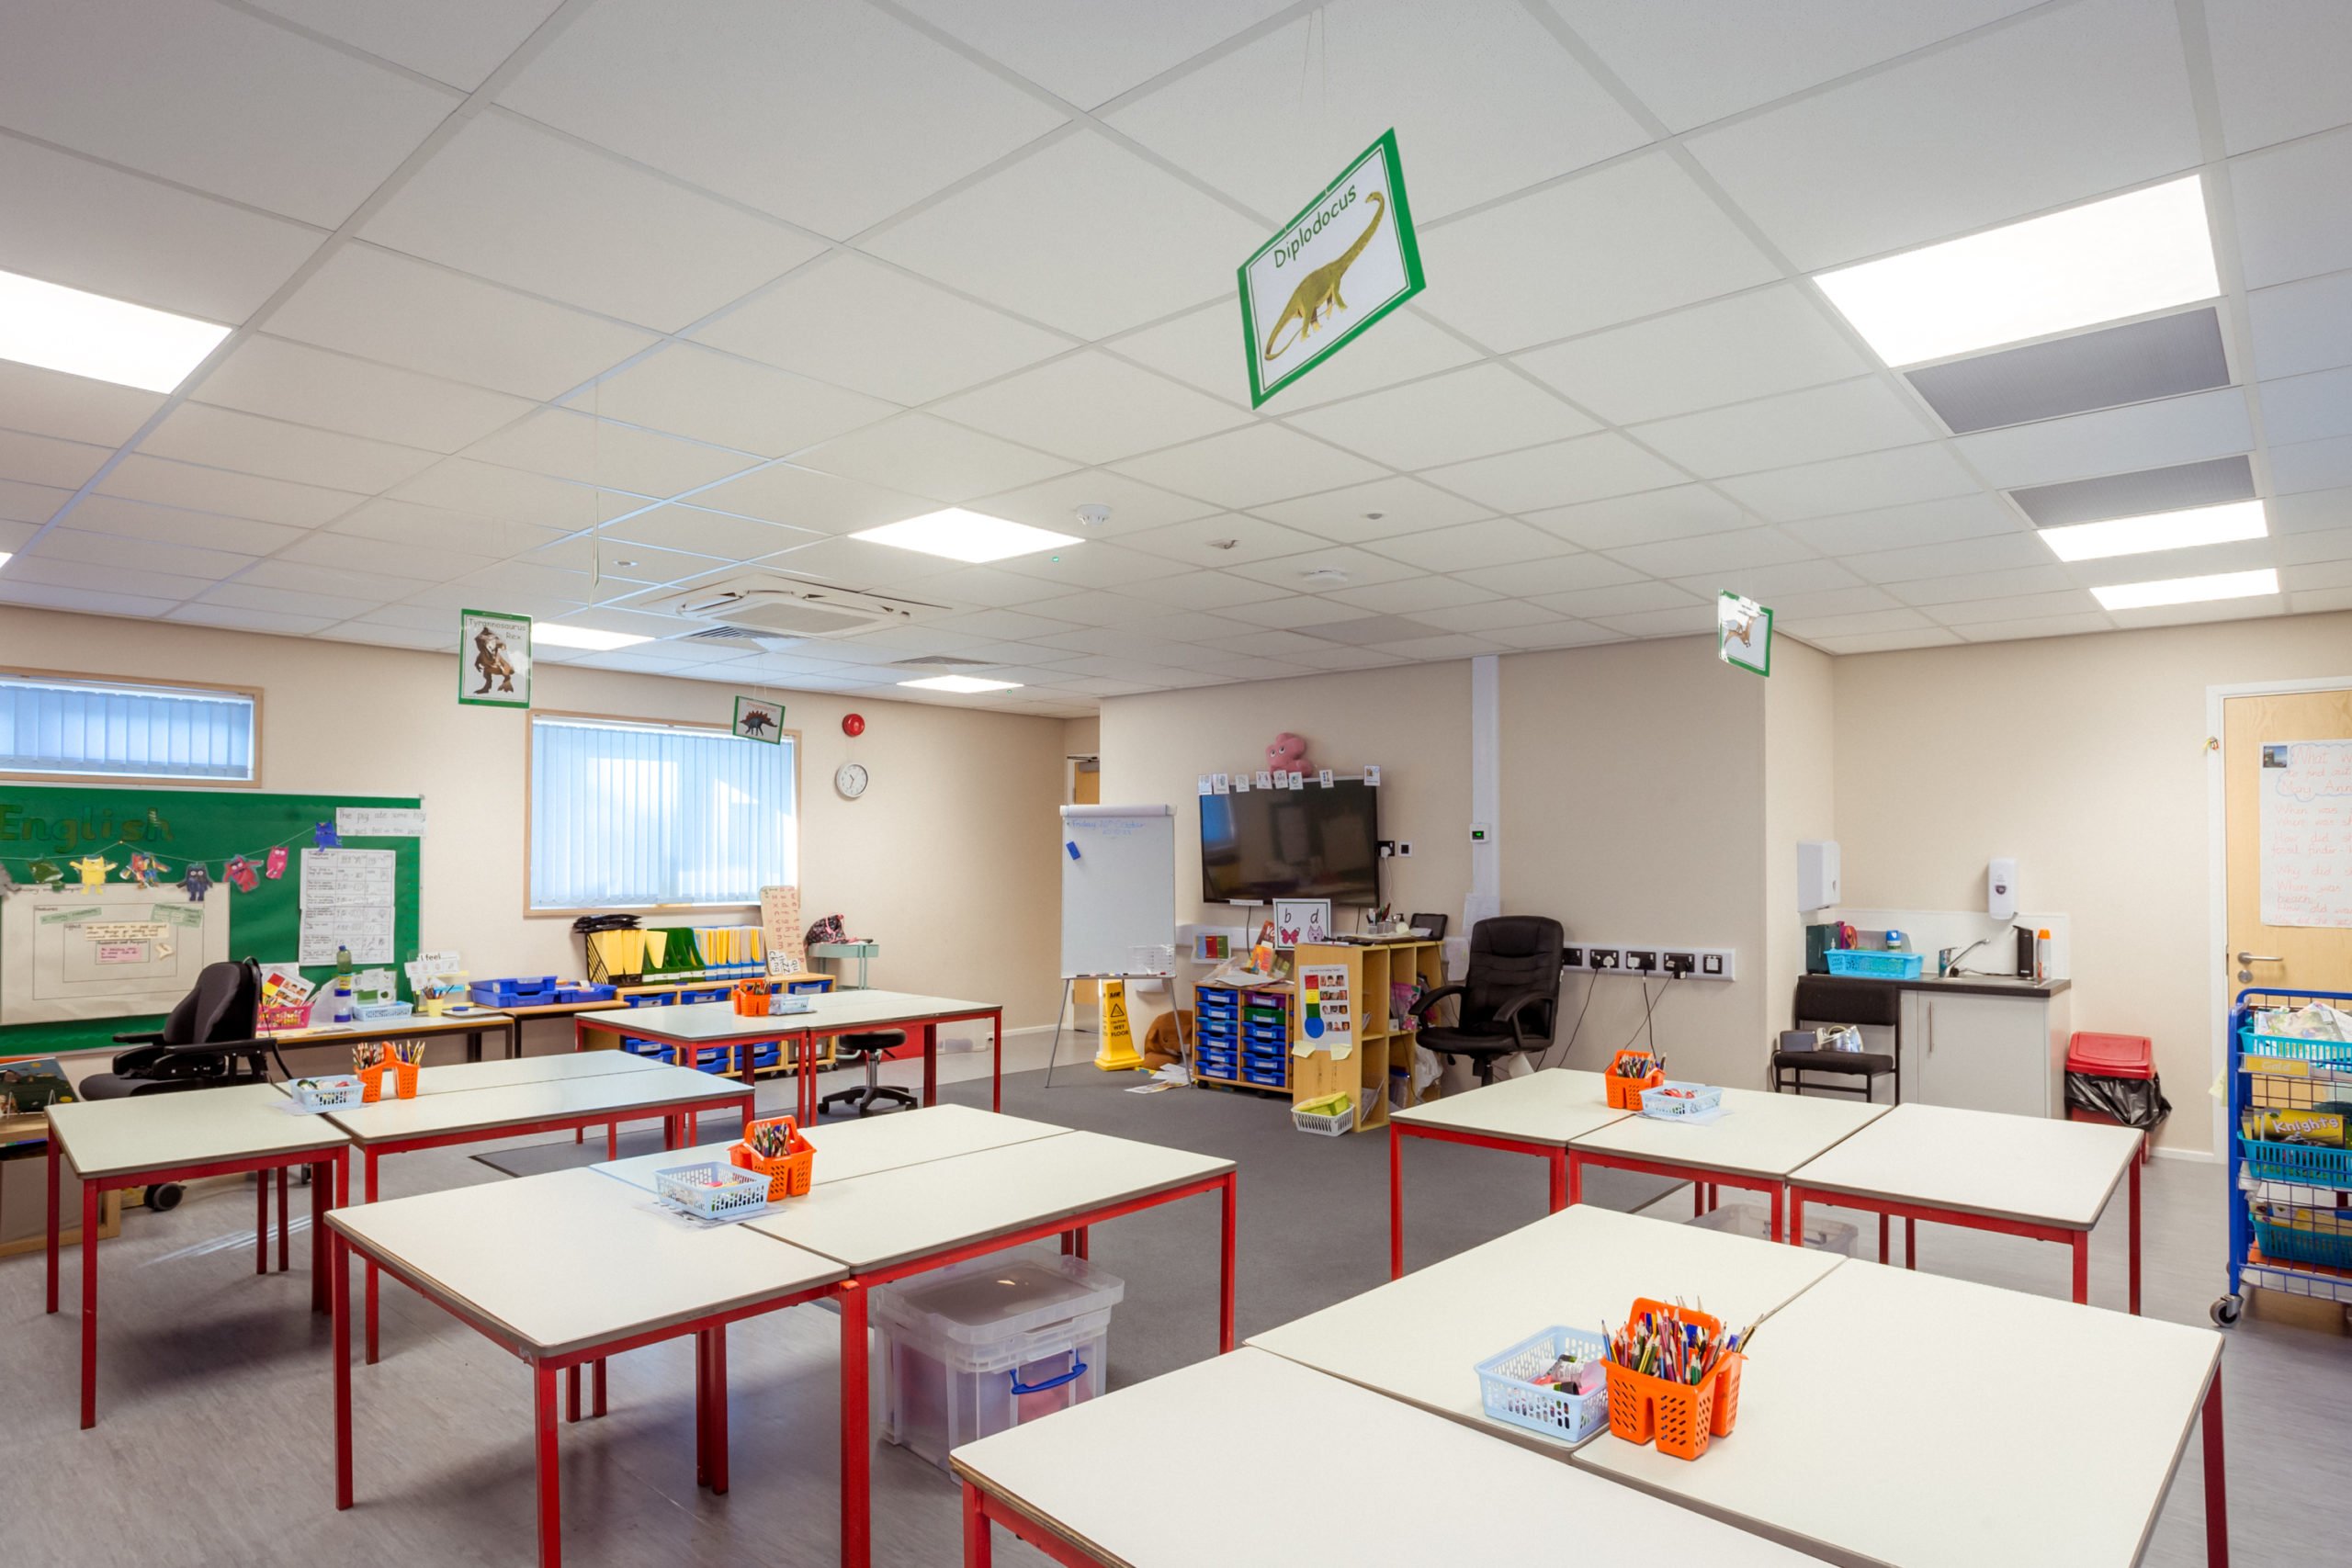 Pilton infants classroom decorated in red